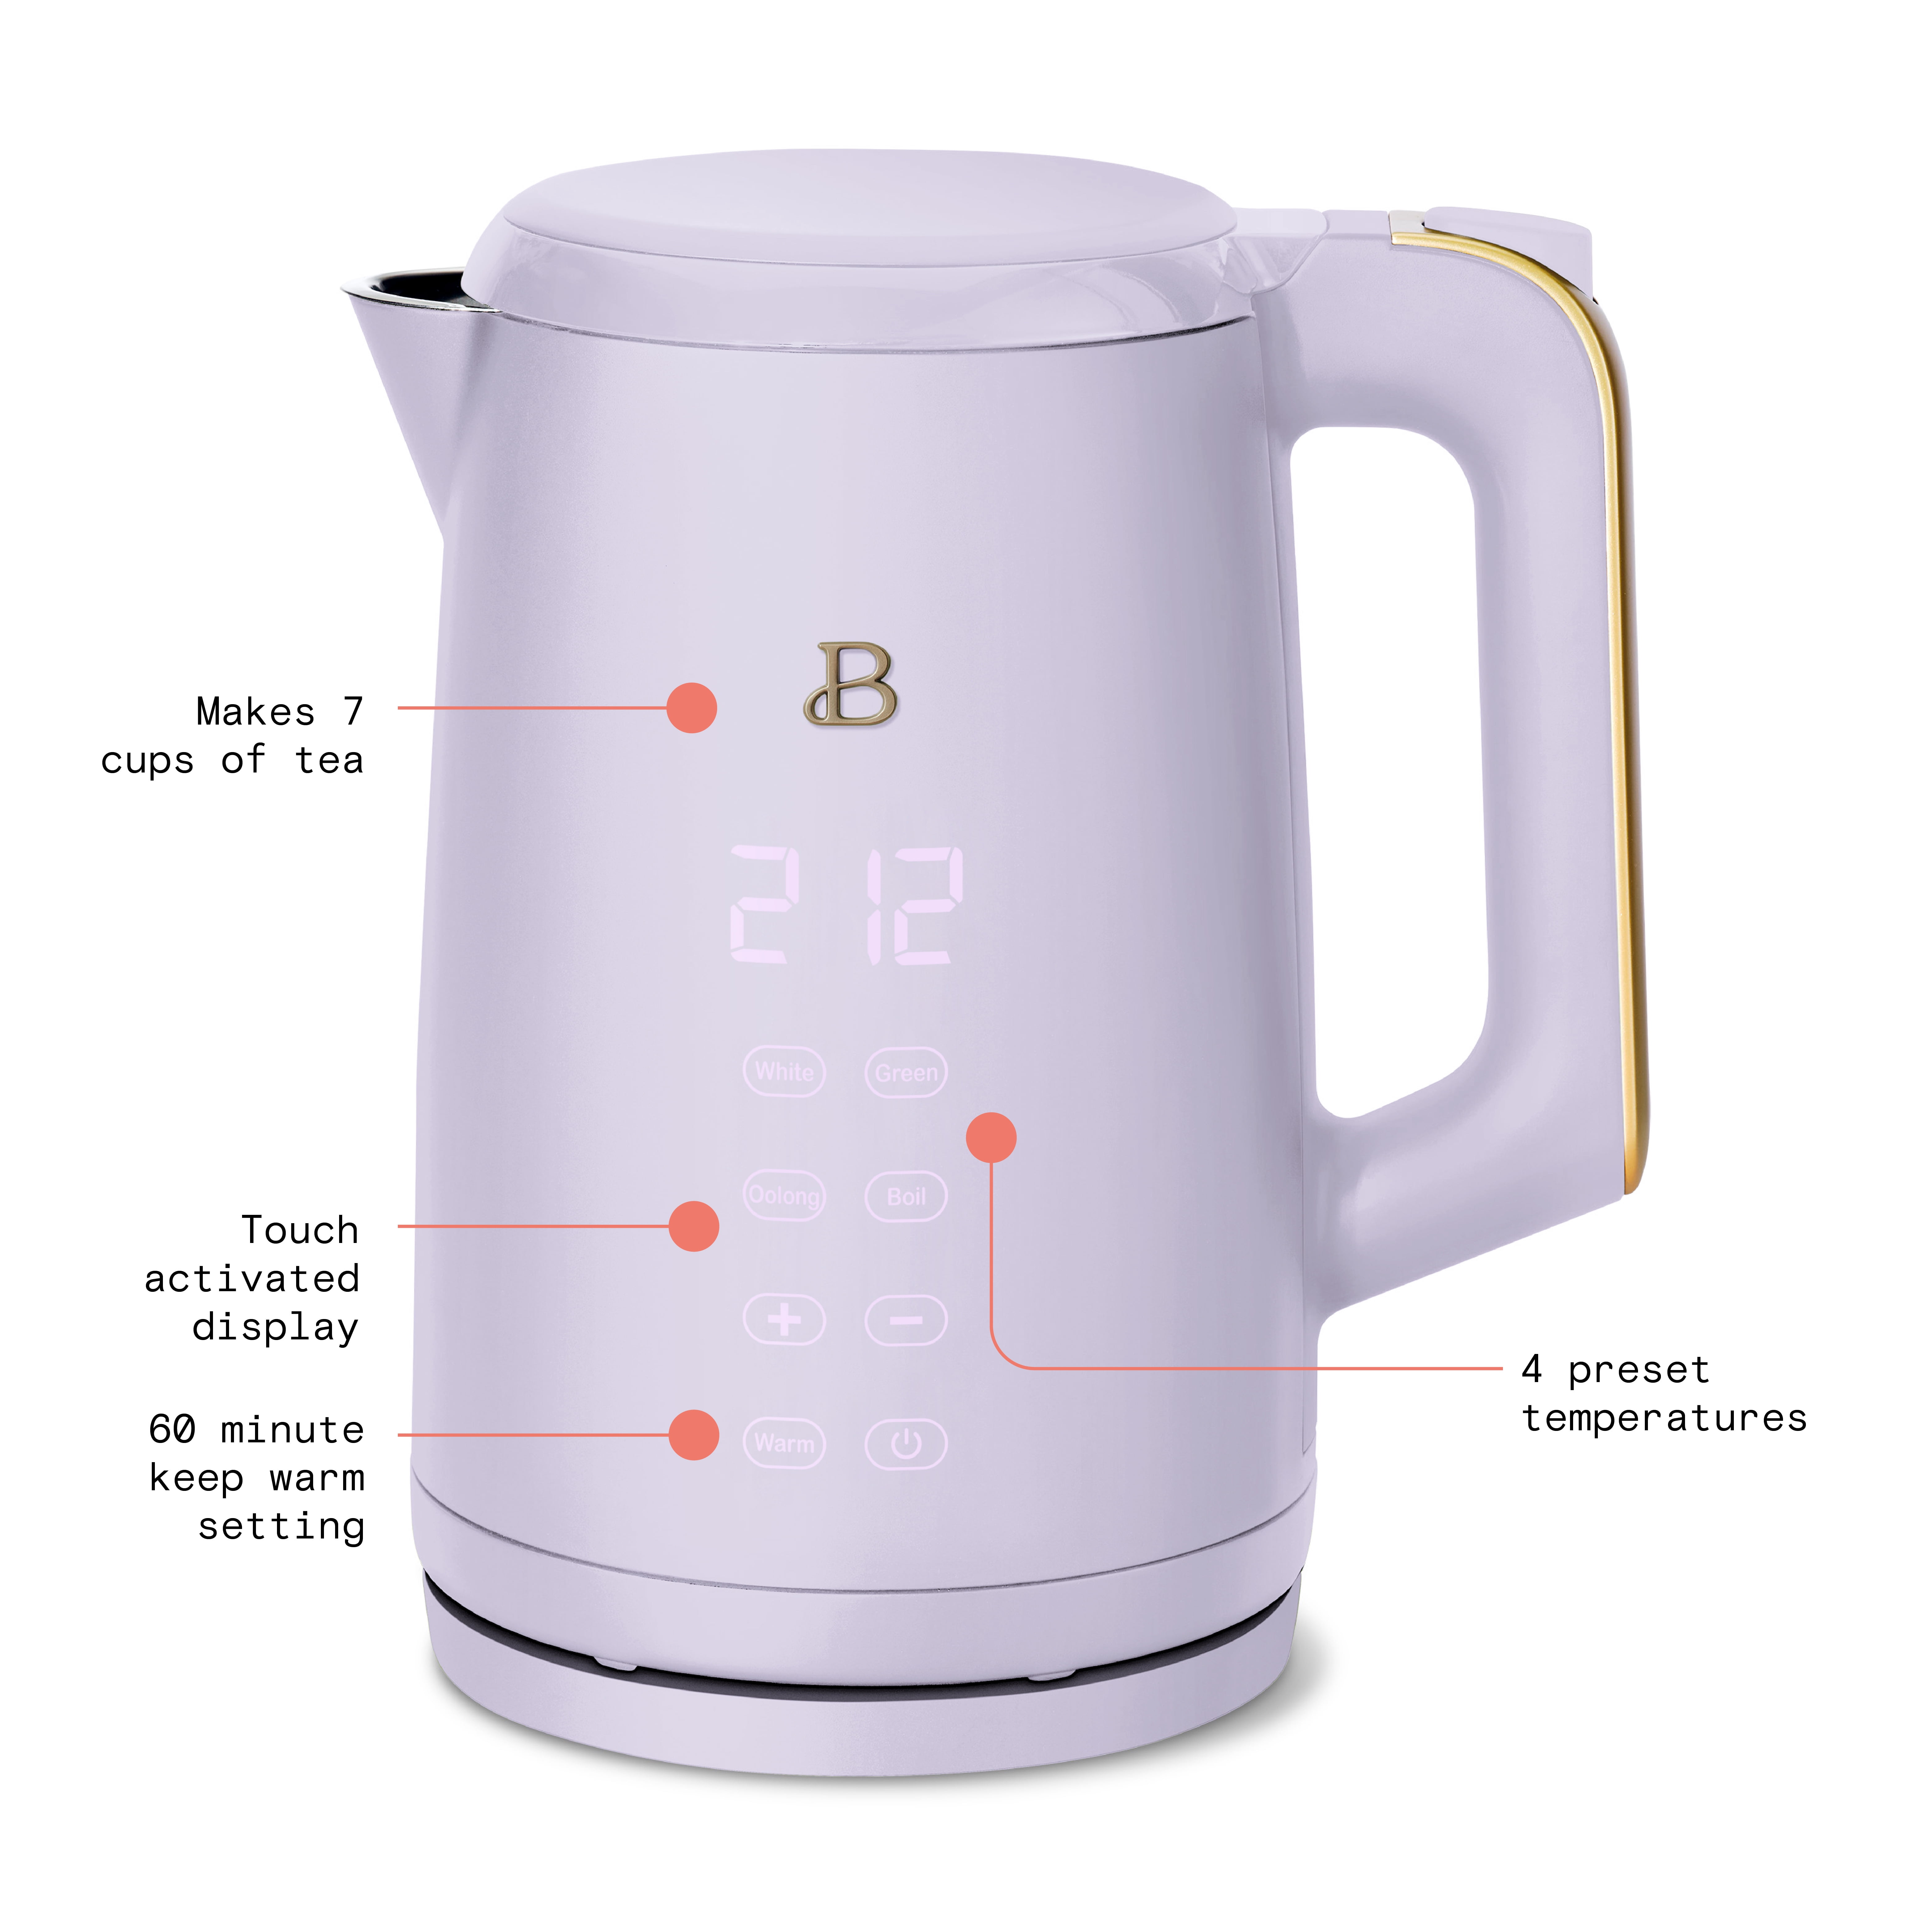 Comment KETTLE for Link in your DM's. This Electric Tea Kettle has been a  family favorite for the last three years. My boys use it for…